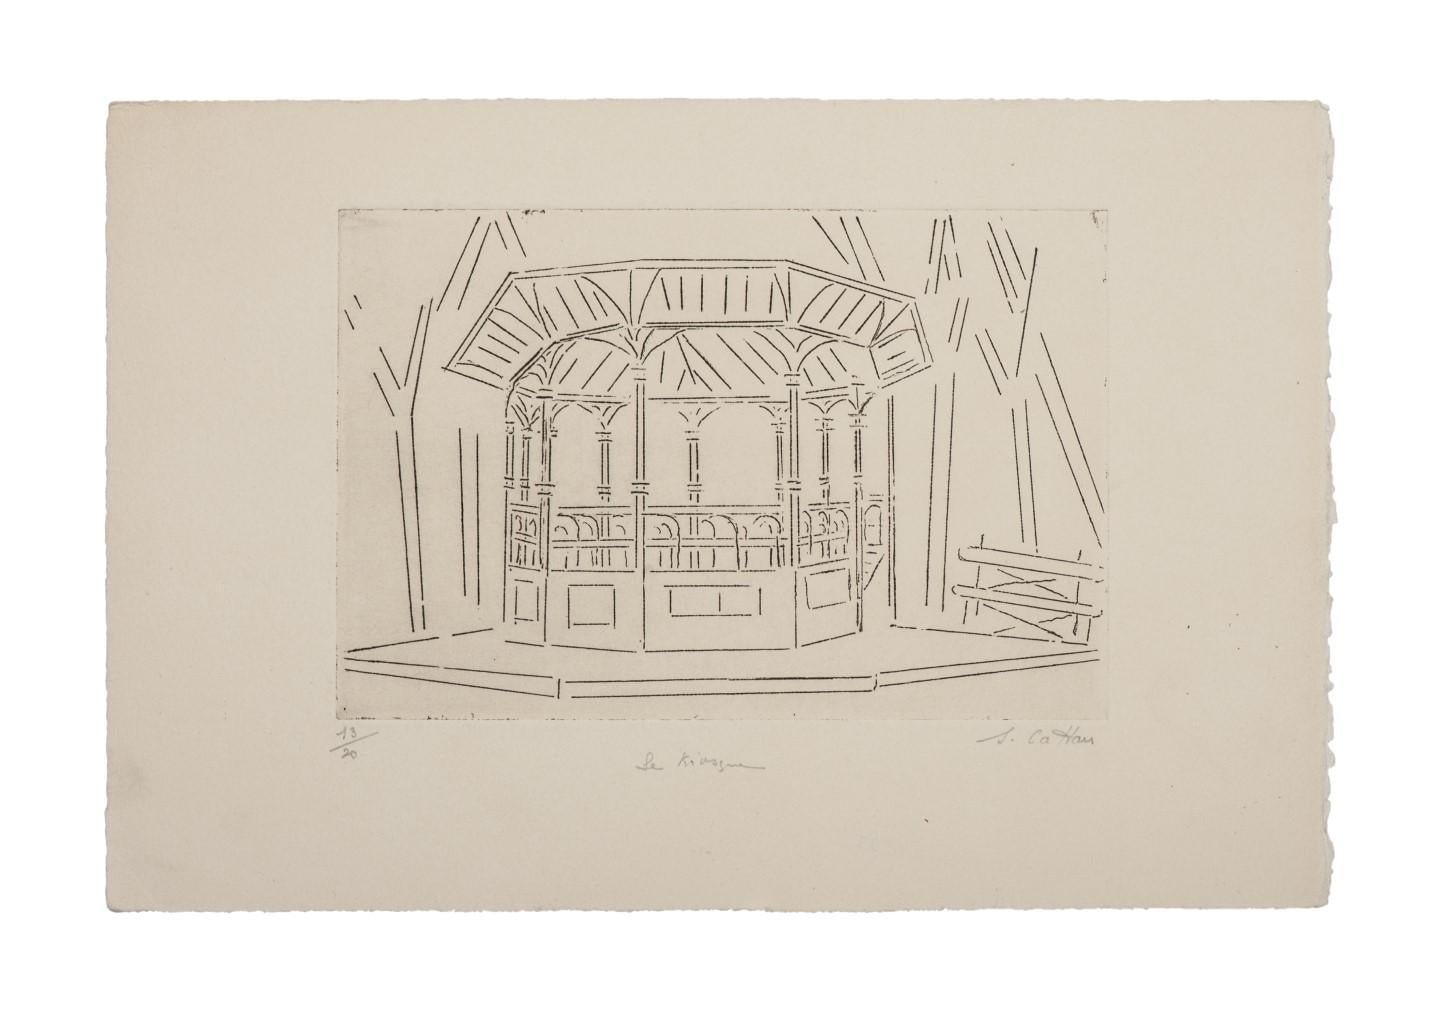 "The Kiosk" is a beautiful print in etching technique, realized by Suzanne Cattan (1910).

Numbered 13/20, on the lower left. Only 20 exemplares. Illegible Hand signed, on the lower right.
Image Dimensions: 12 x 18 cm

The title of the work, on the